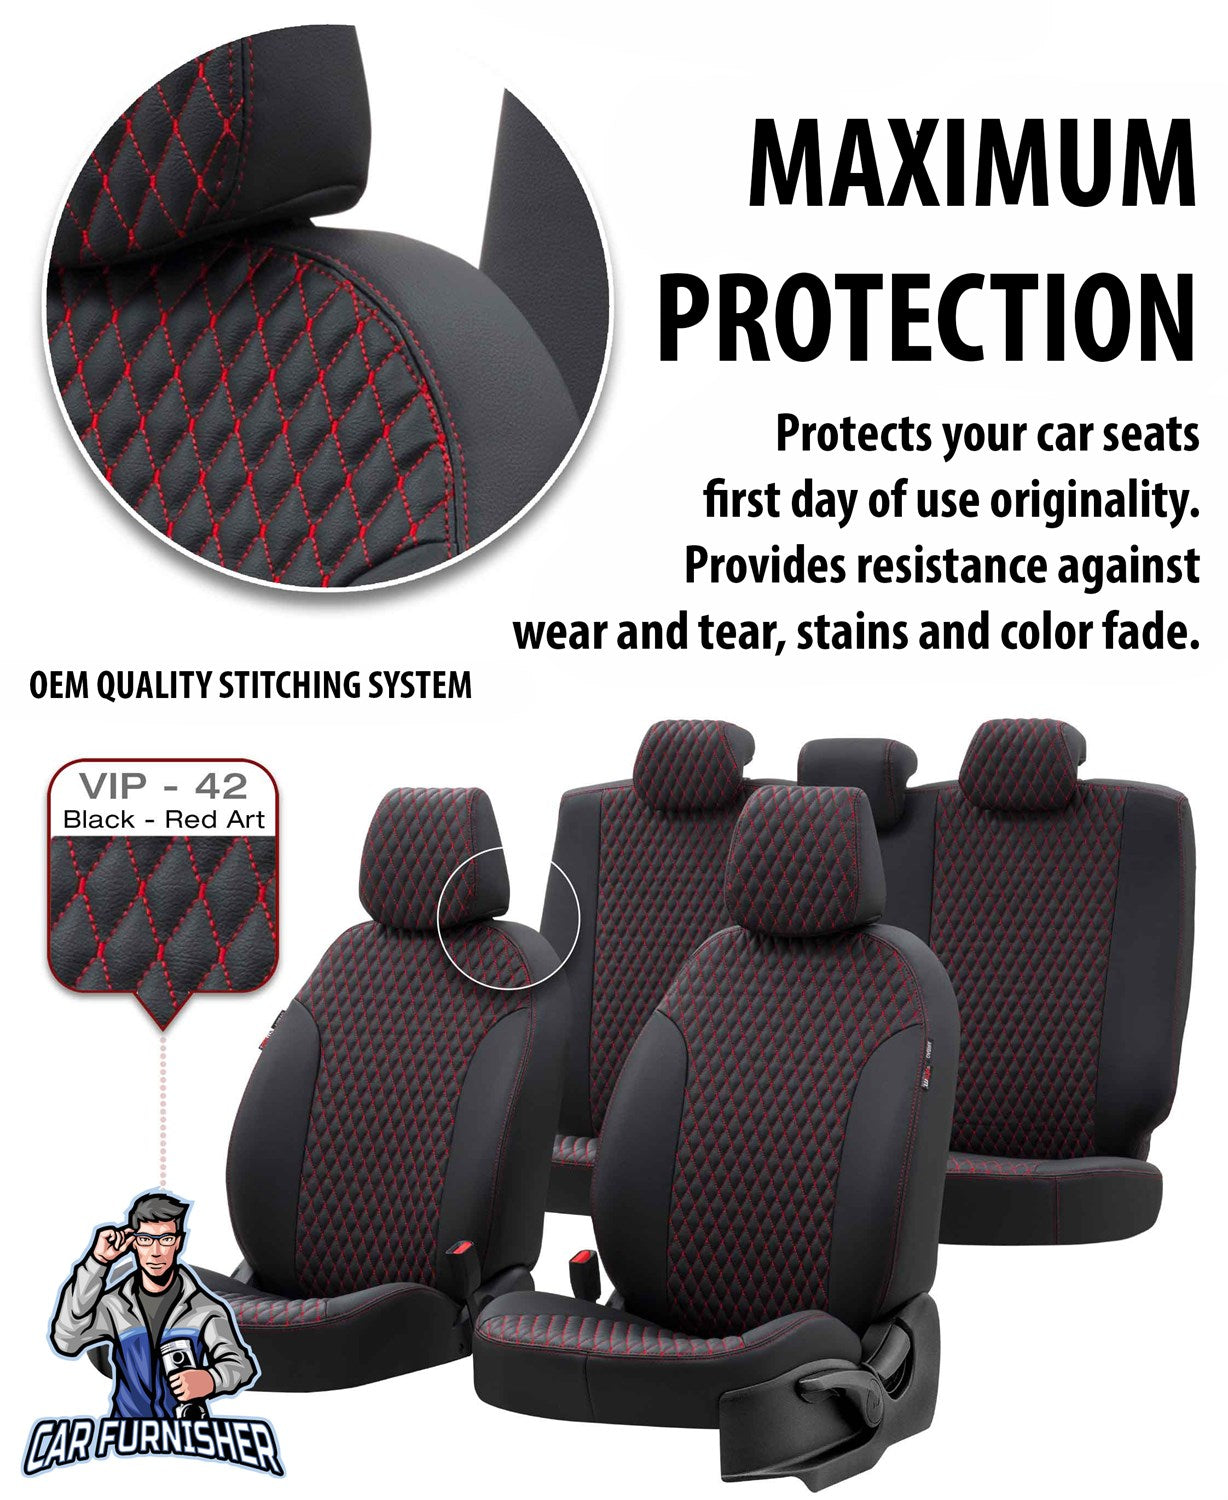 Volkswagen Sharan Seat Cover Amsterdam Leather Design Red Leather